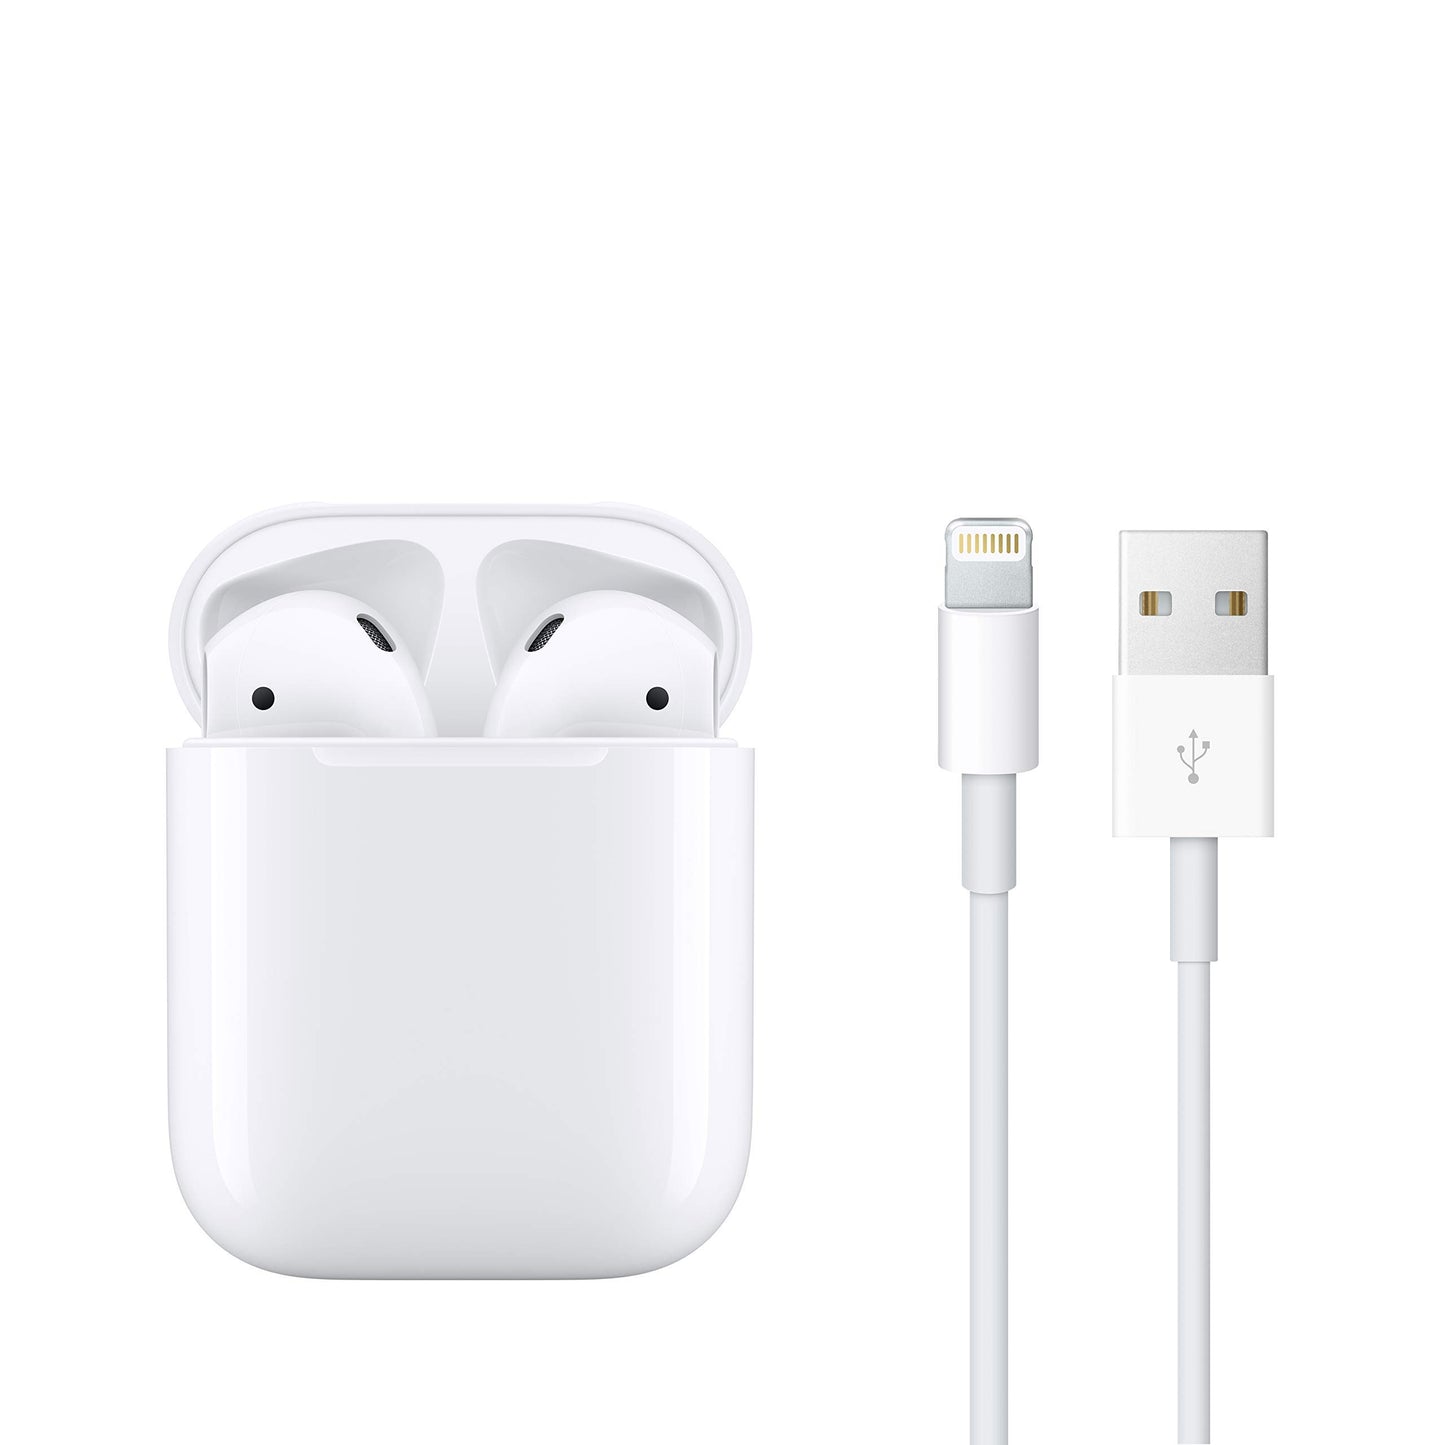 Apple AirPods with Charging Case - White, Wireless